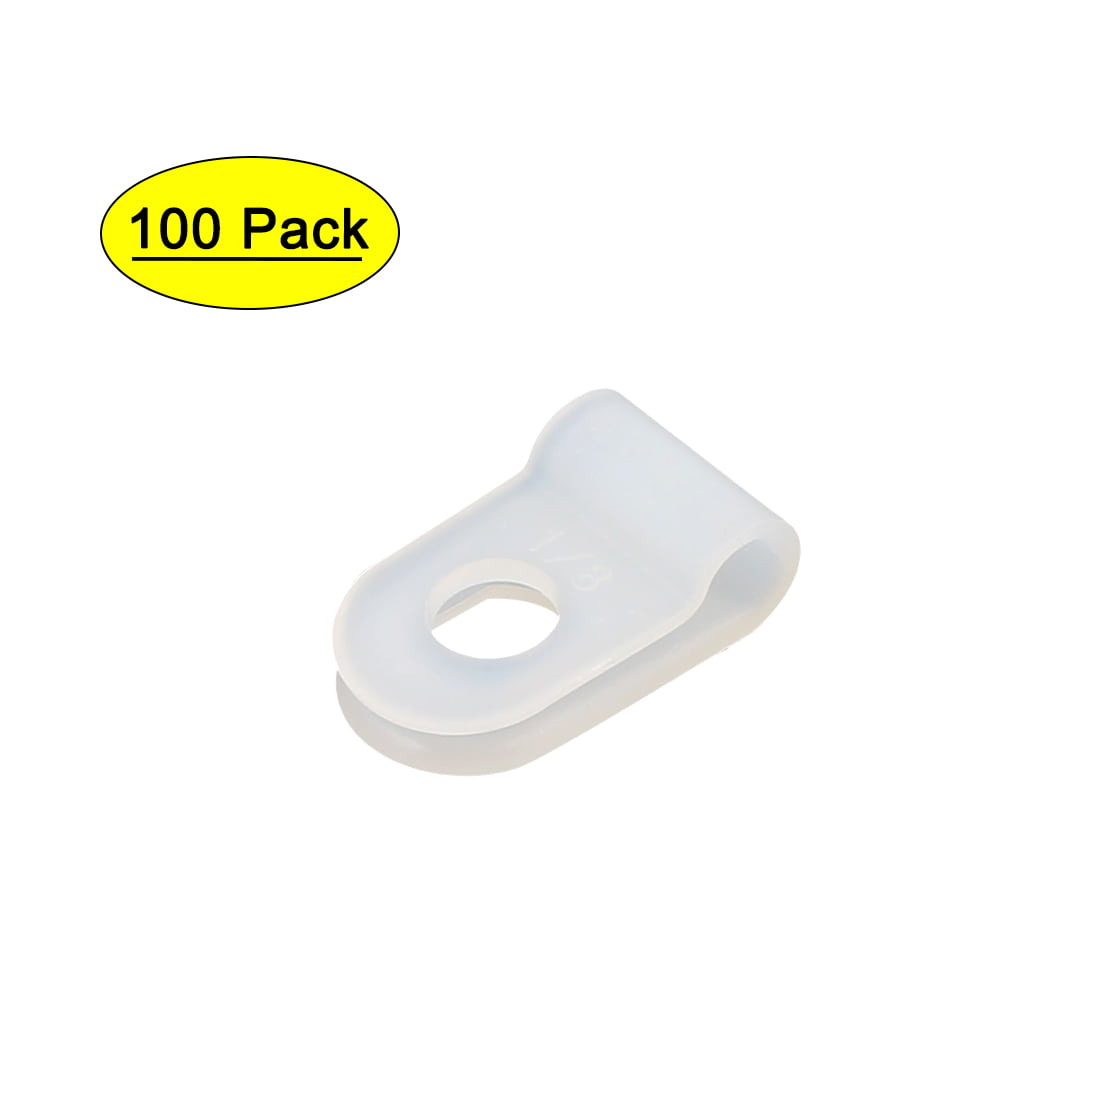 300 Pcs 3/4" Diameter Cable Cord Wire Organizer Clamp Clip R-Type Clear White 